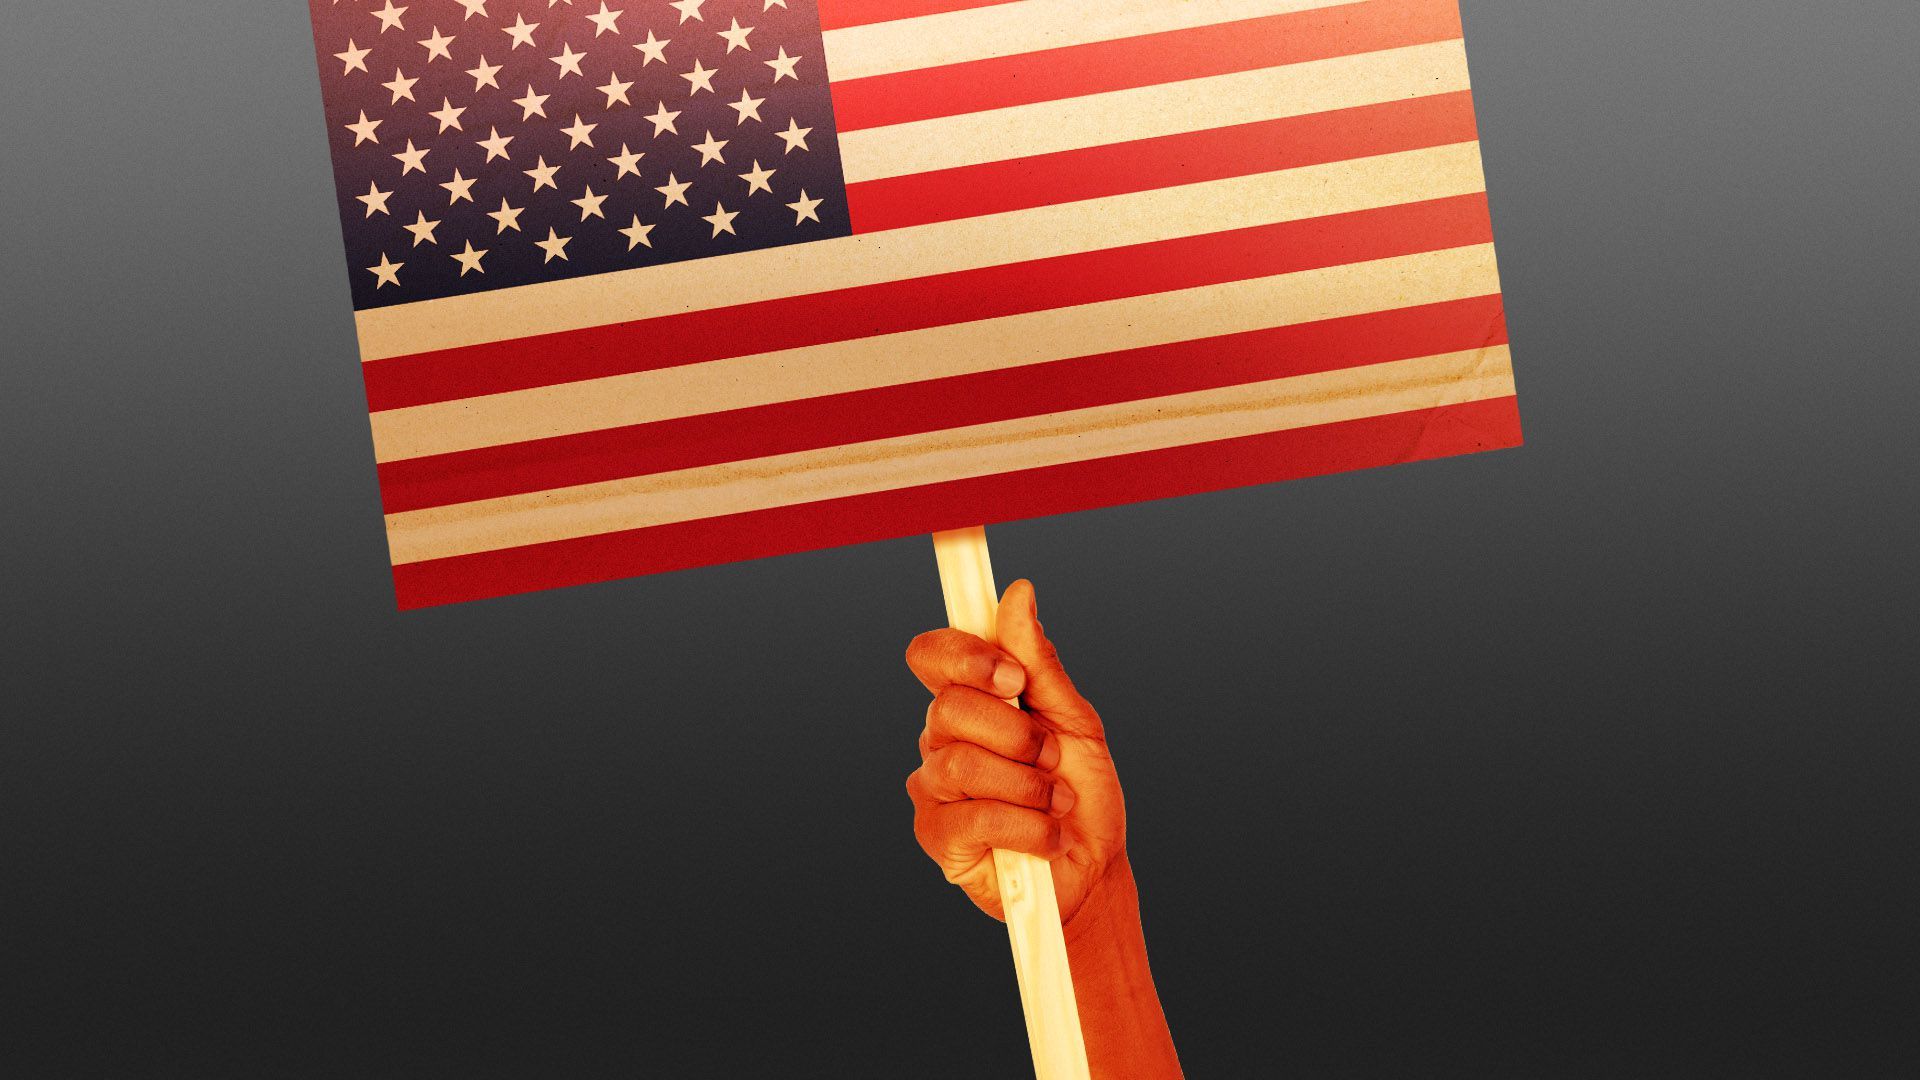 Illustration of a had holding a protest sign with an American flag on it